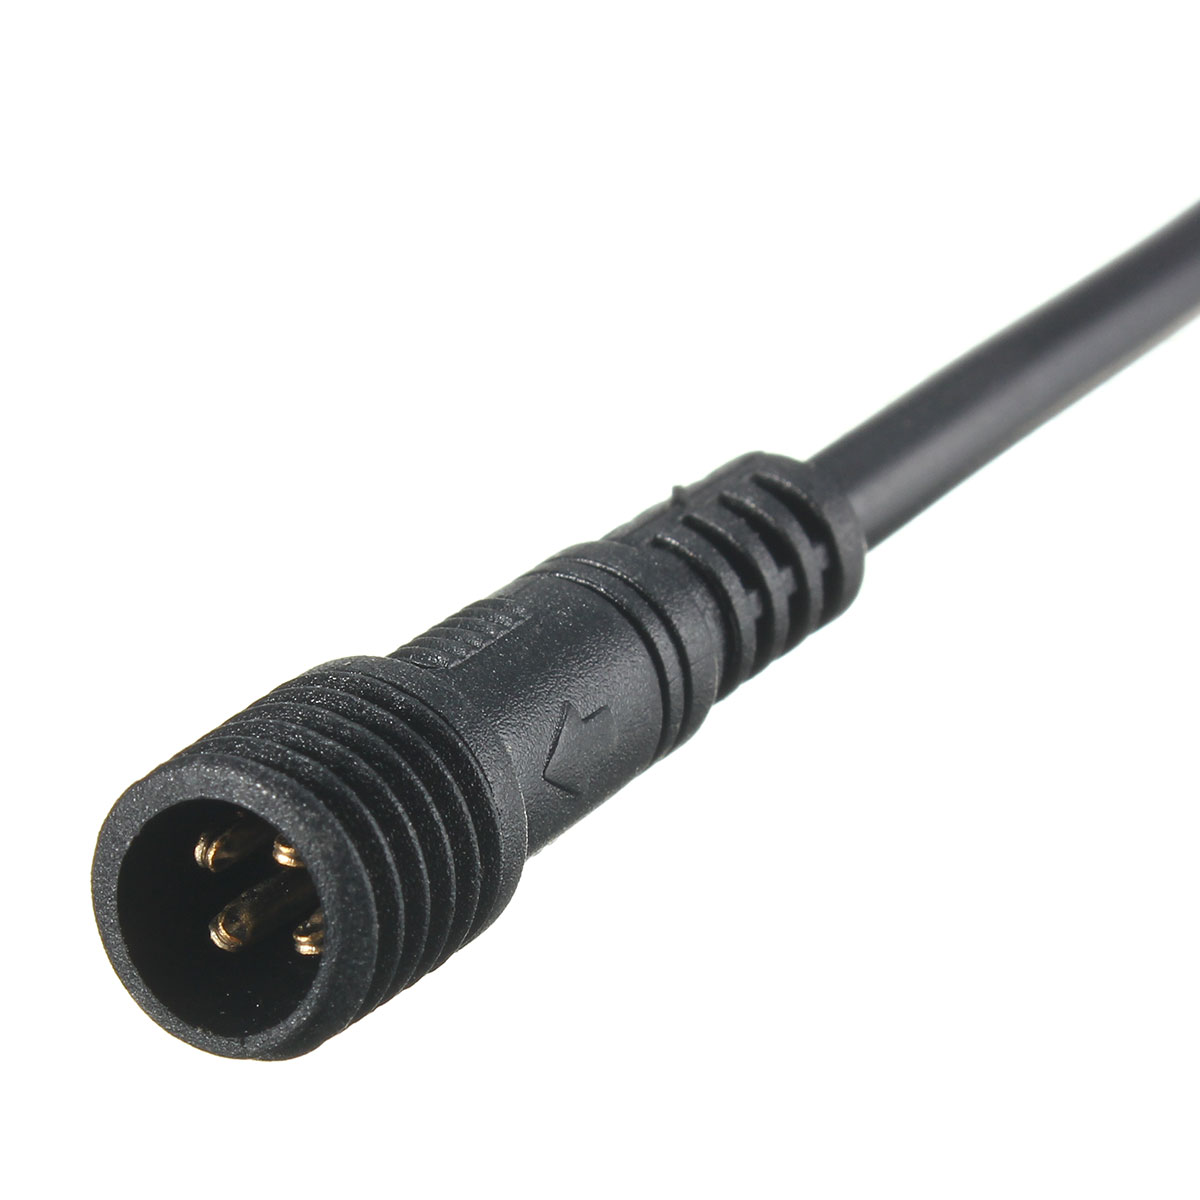 4-Pin-2A-Waterproof-Male-Female-Extension-Cable-Wire-Connector-for-RGB-LED-Strip-Light-1456460-4